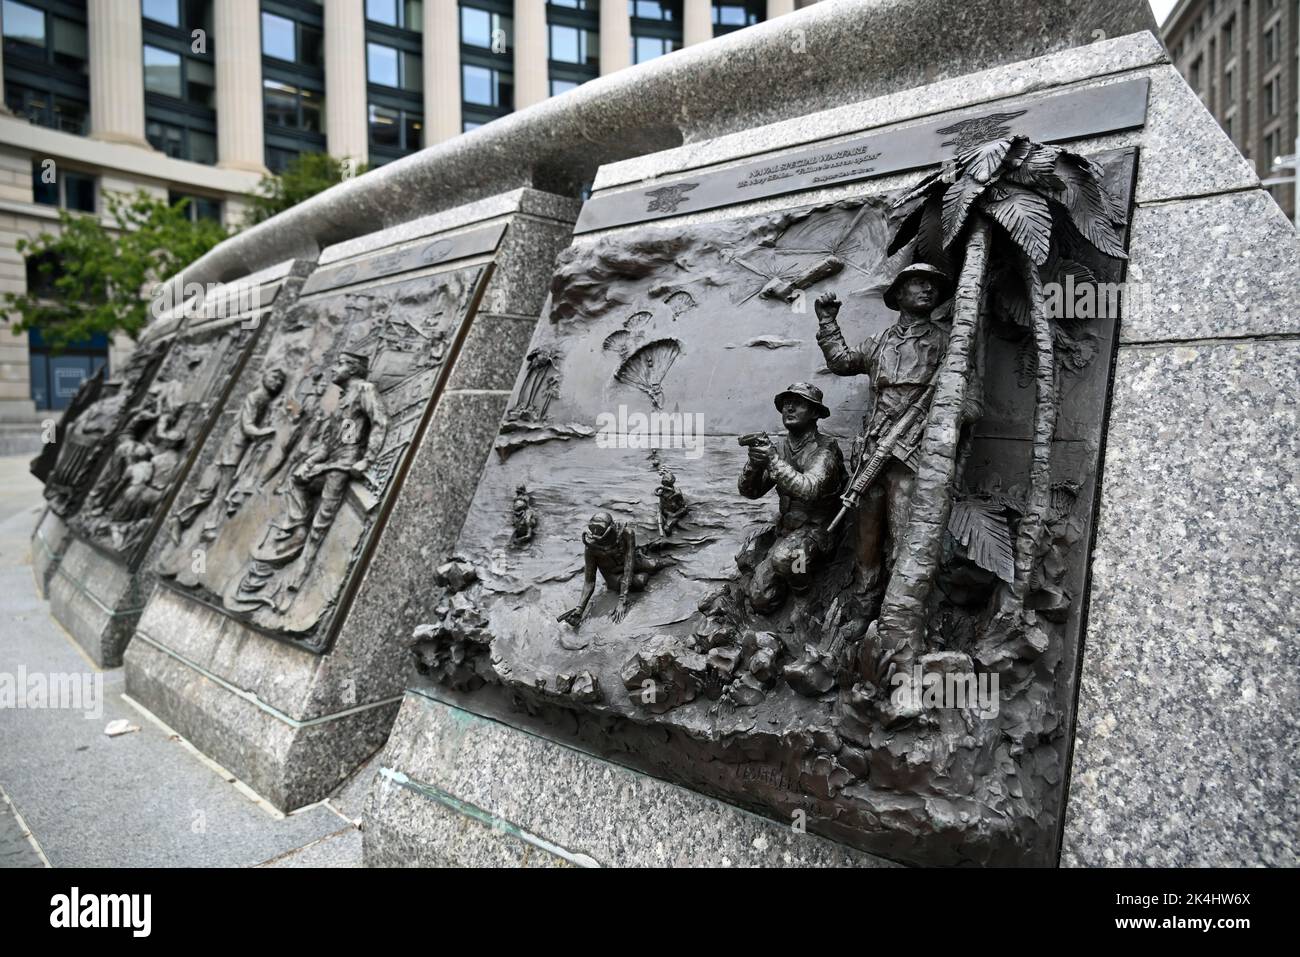 Relief panel depicting Navy Seals special operations forces at the US Navy Memorial located next to the Navy Heritage Center in Washington, DC. Stock Photo